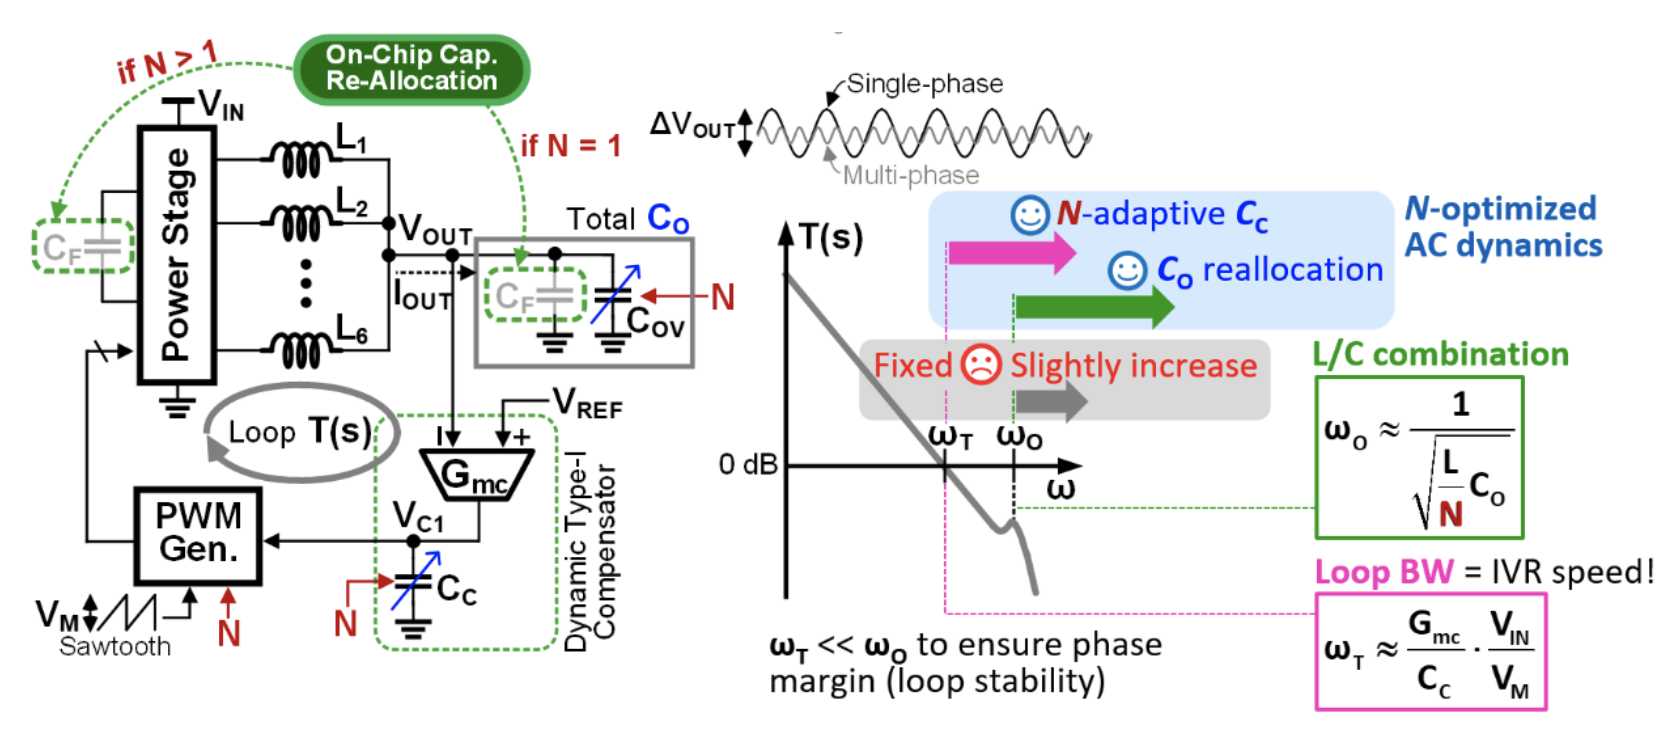 Fig 2. Proposed on-chip capacitor reallocation technique to optimize phase-shedding